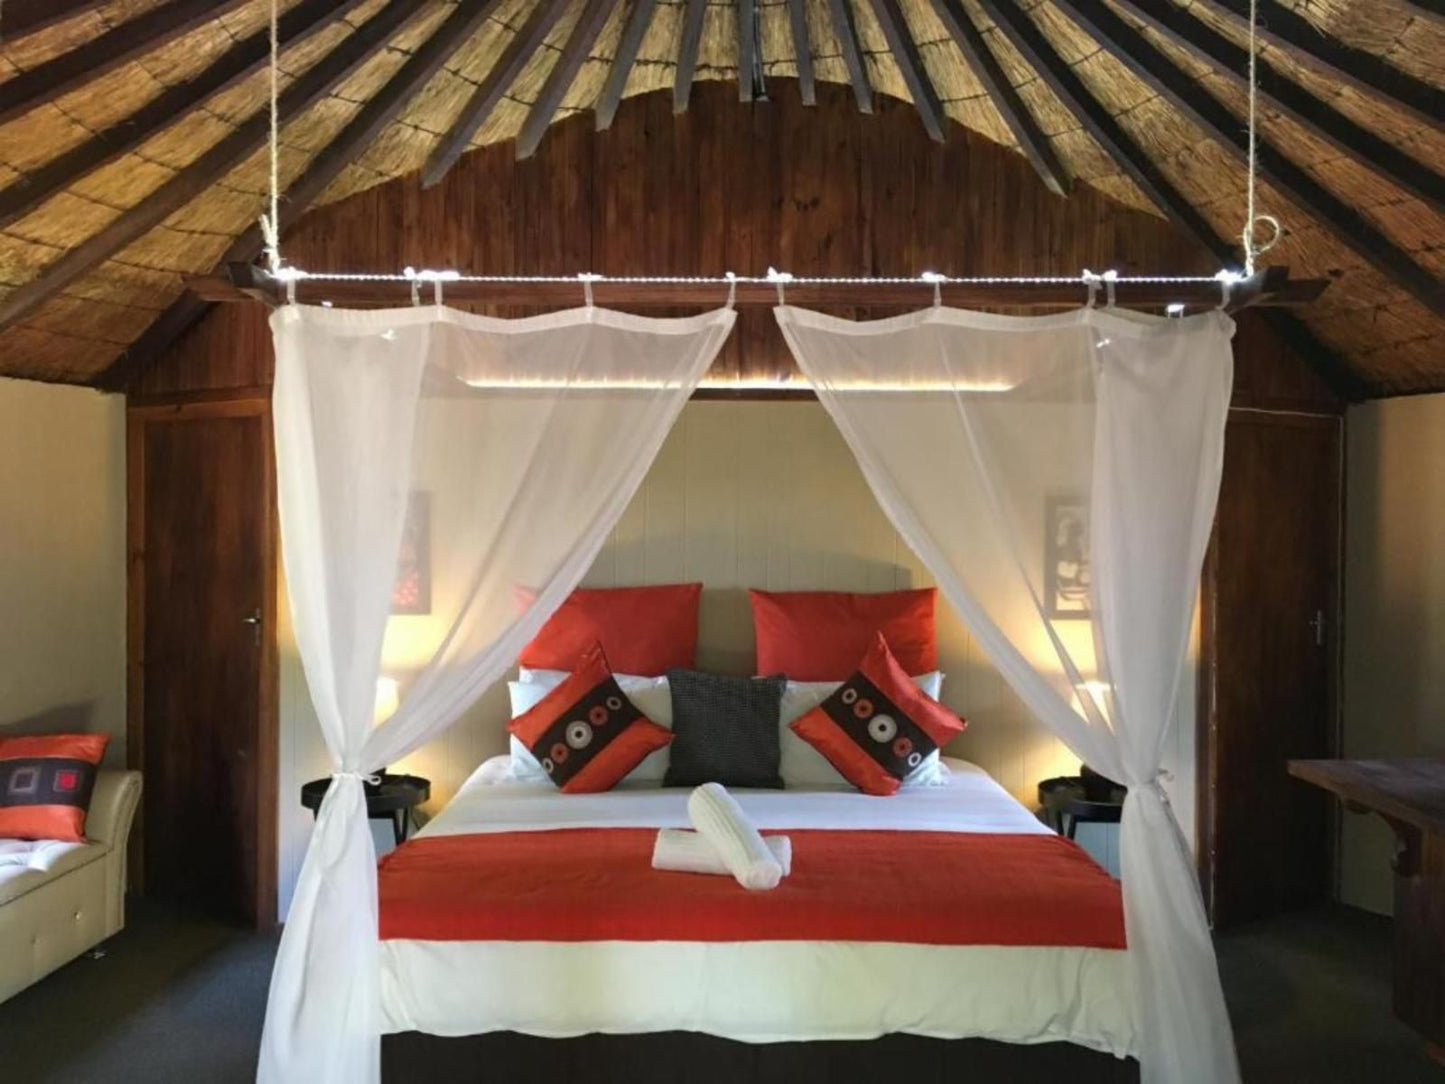 Biggy Best Cottages Howick Kwazulu Natal South Africa Tent, Architecture, Bedroom